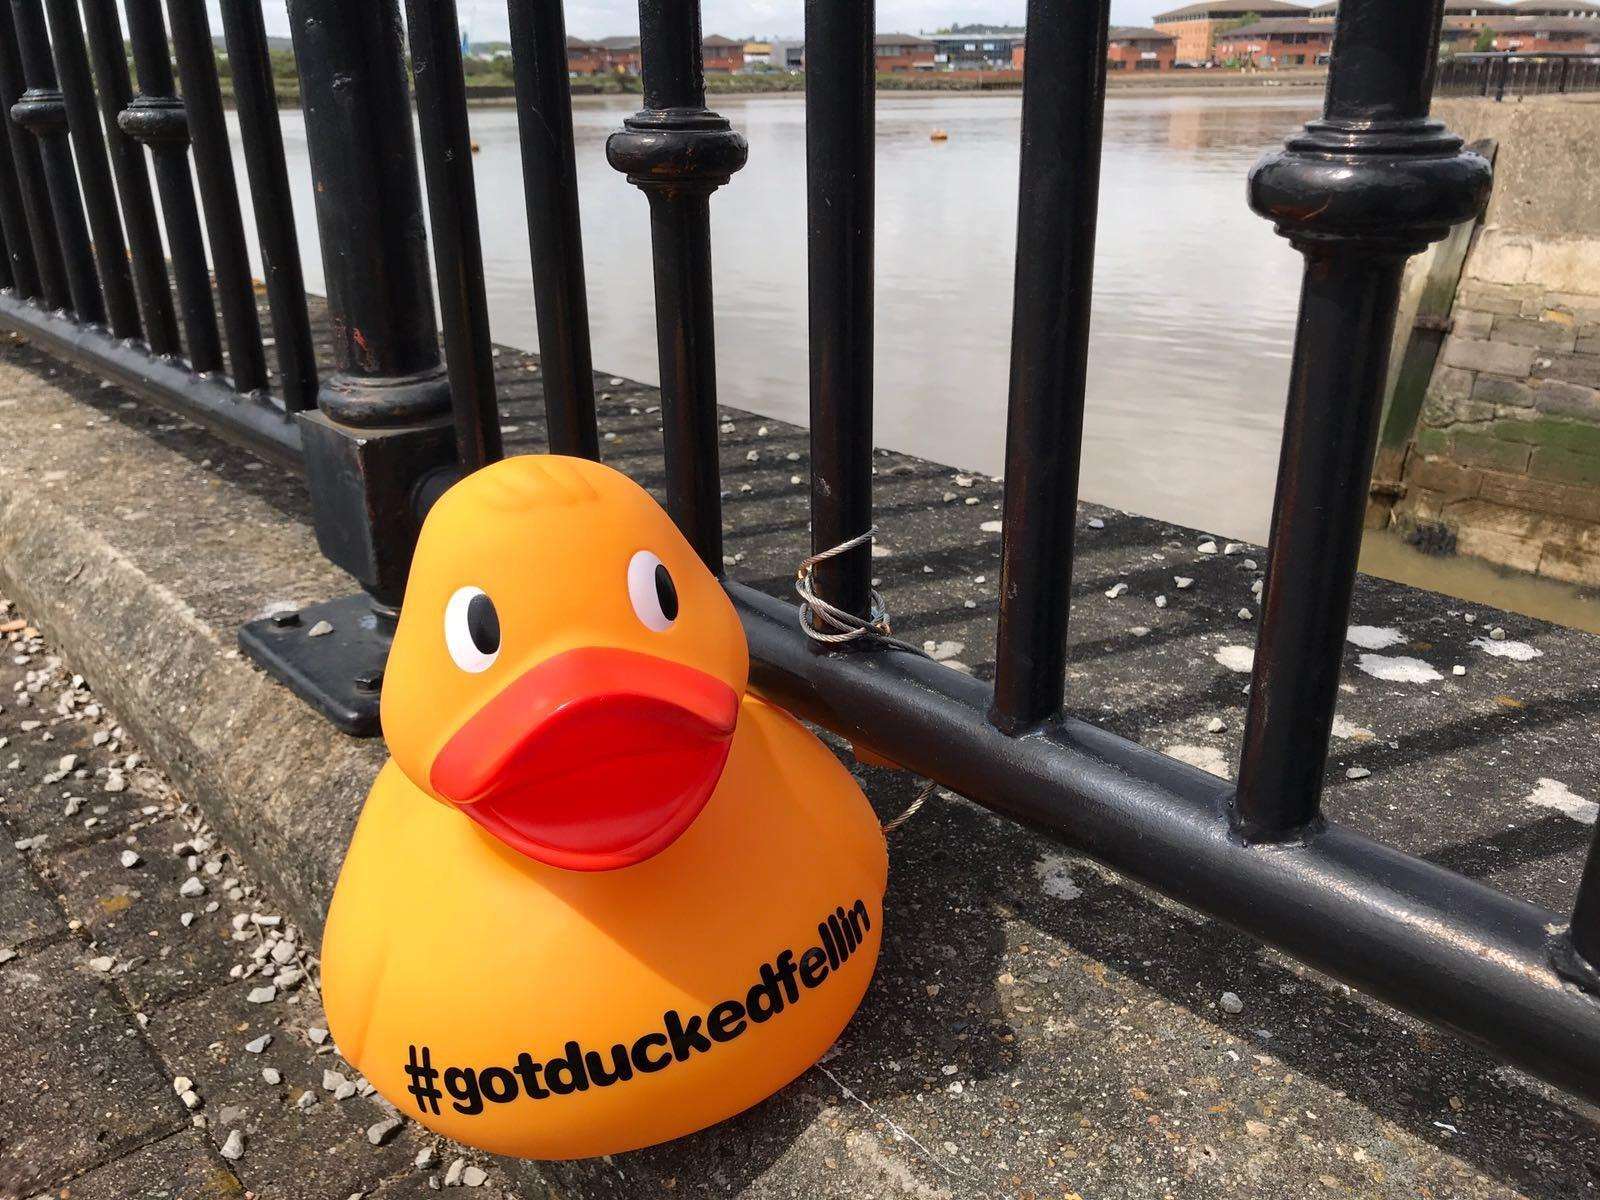 Giant ducks will be springing up across the county as part of the campaign (1720233)